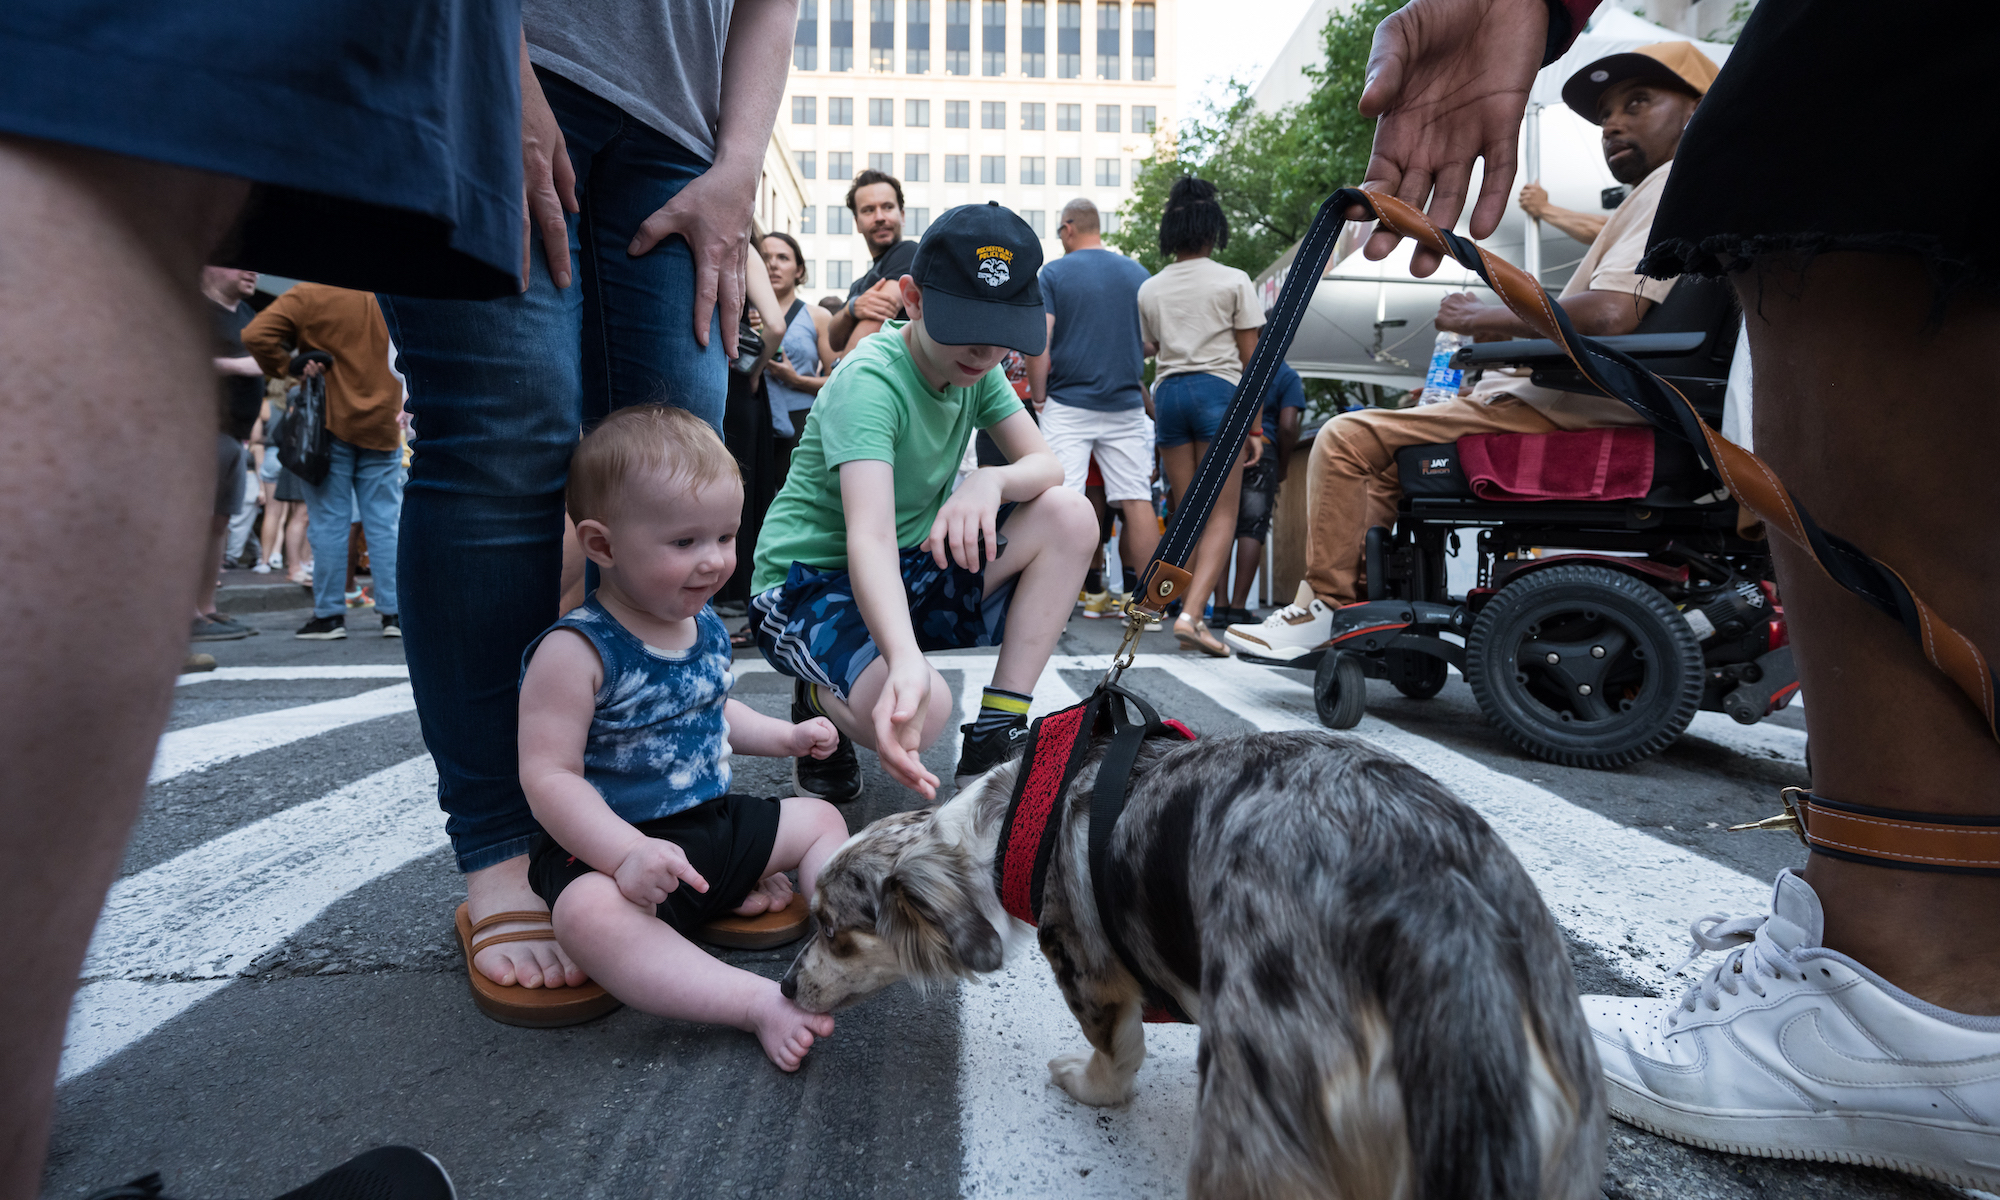 A baby and a small child pet a dog outside in the middle of a busy crowd